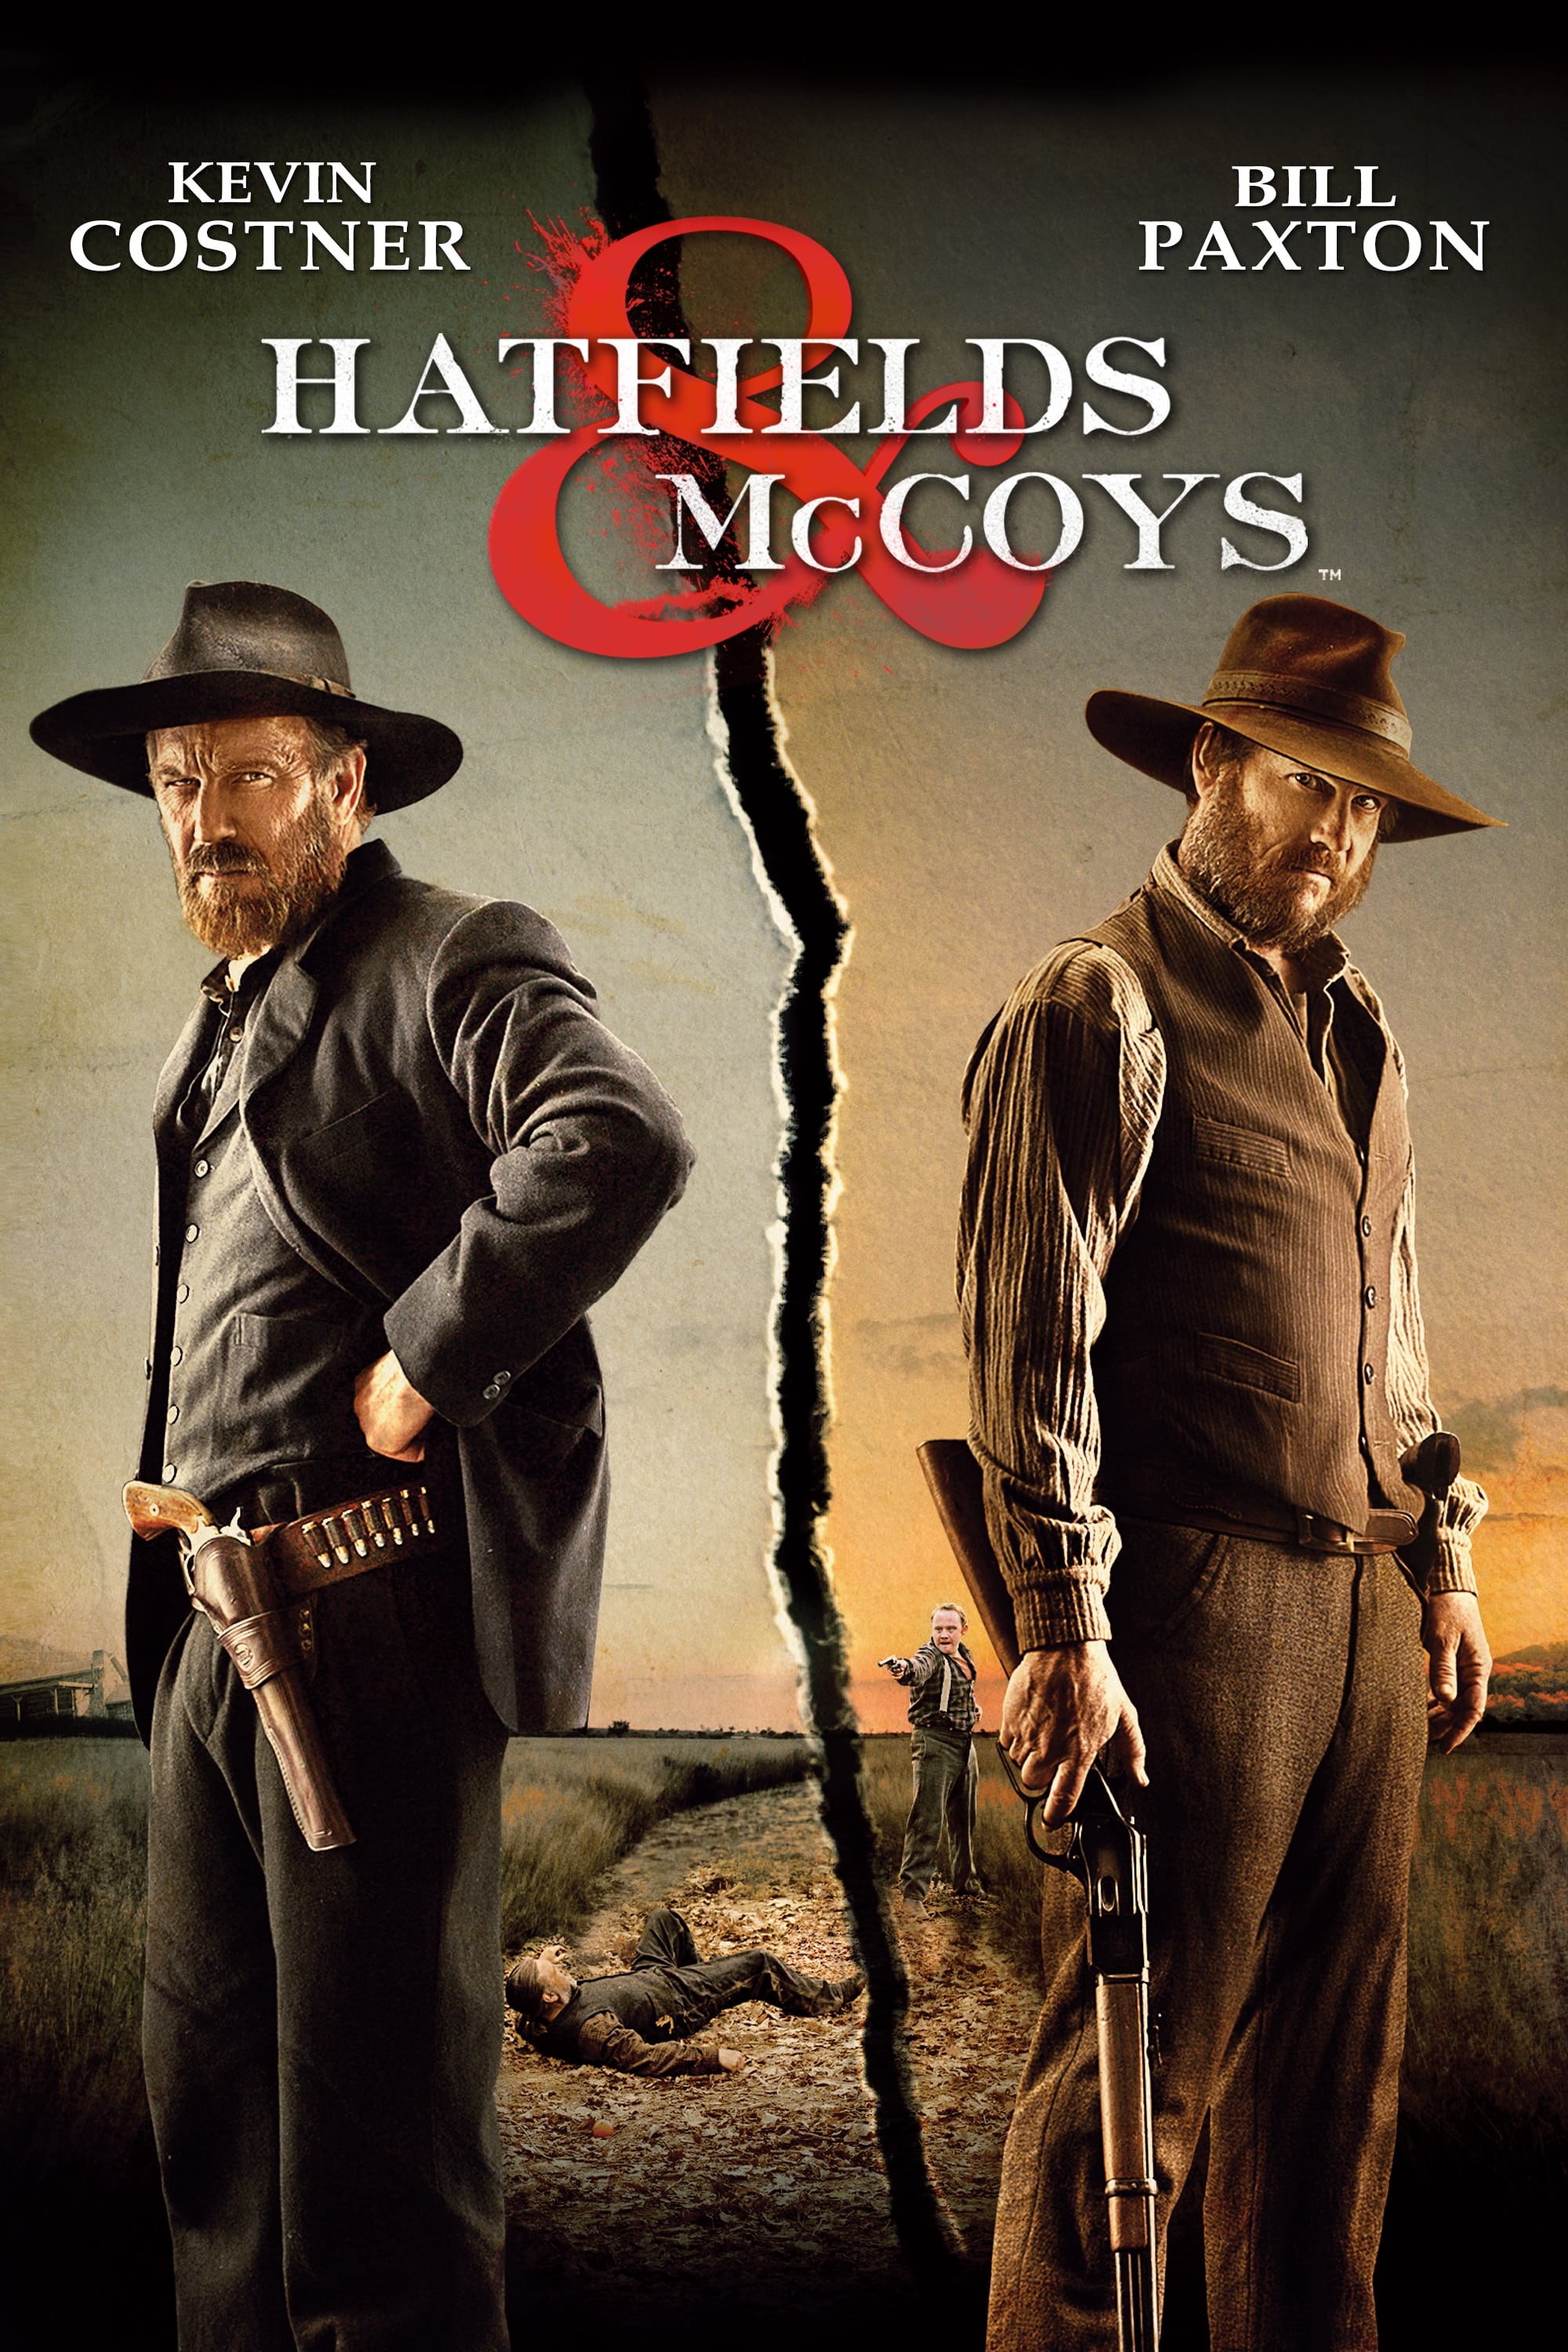 Hatfields & McCoys TV Shows About Feud